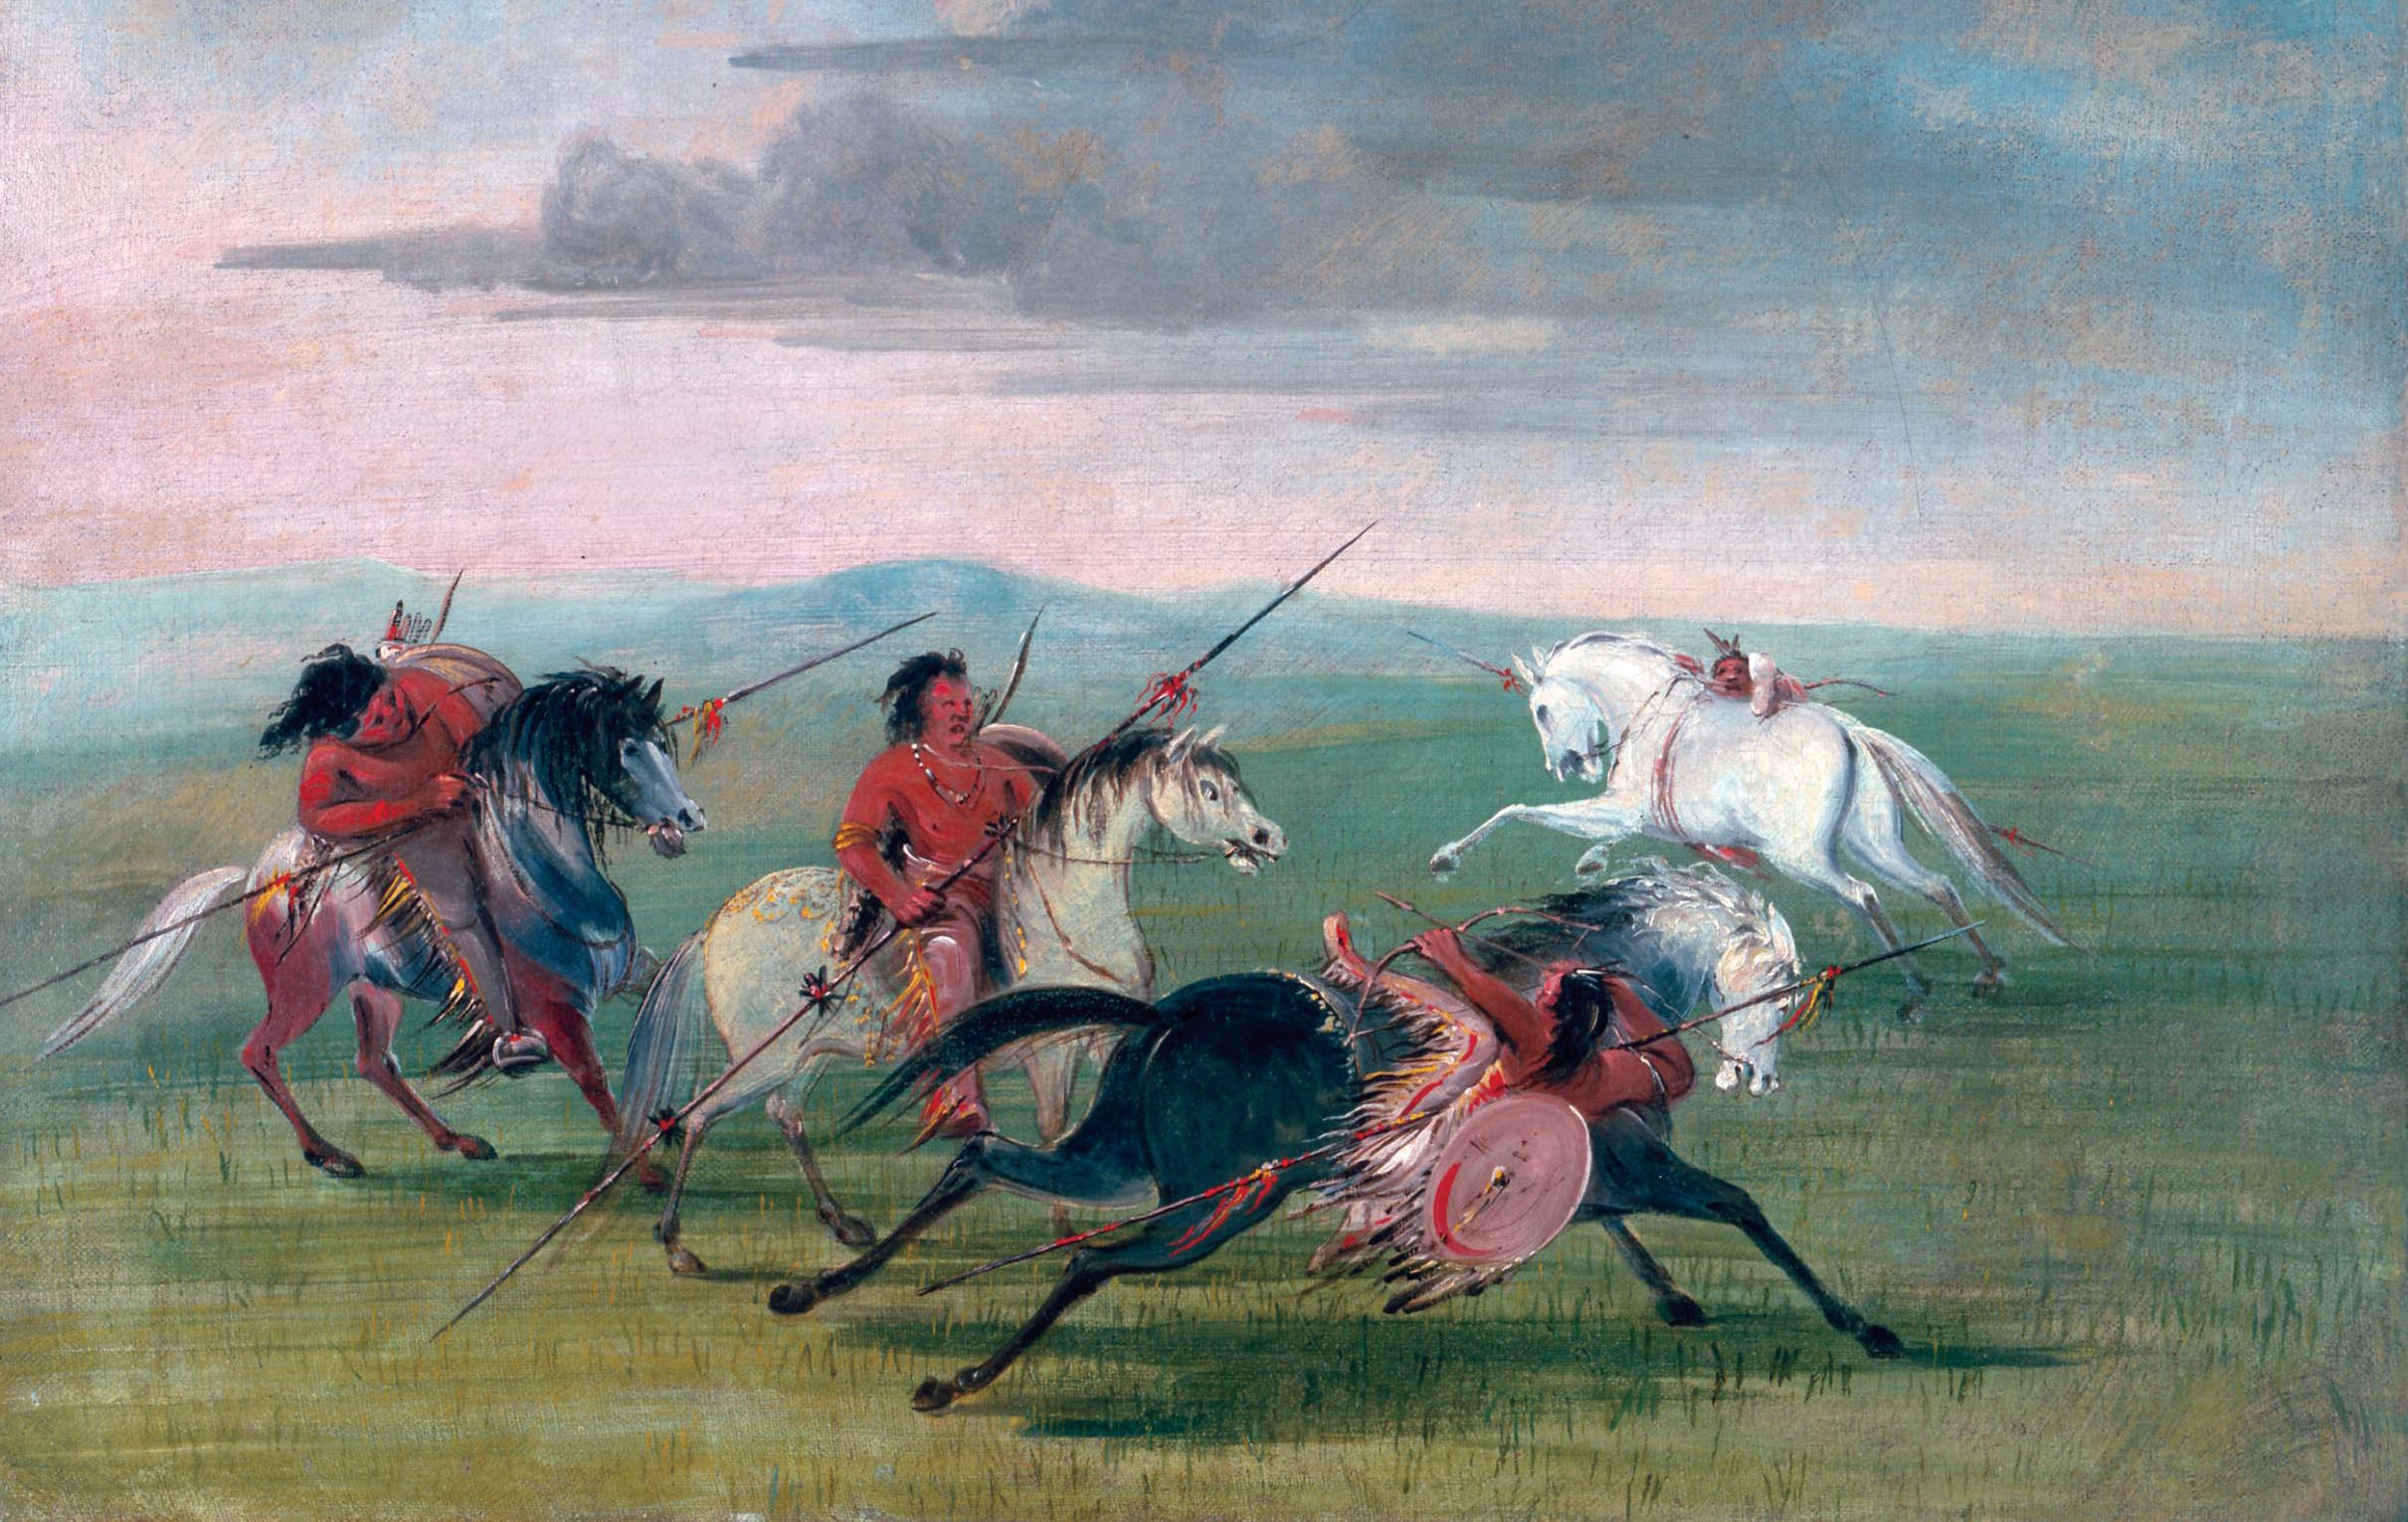 Comanche warriors were skilled horsemen, able to hang off the side of their mount as they shot their arrows, as depicted in this painting by George Catlin.